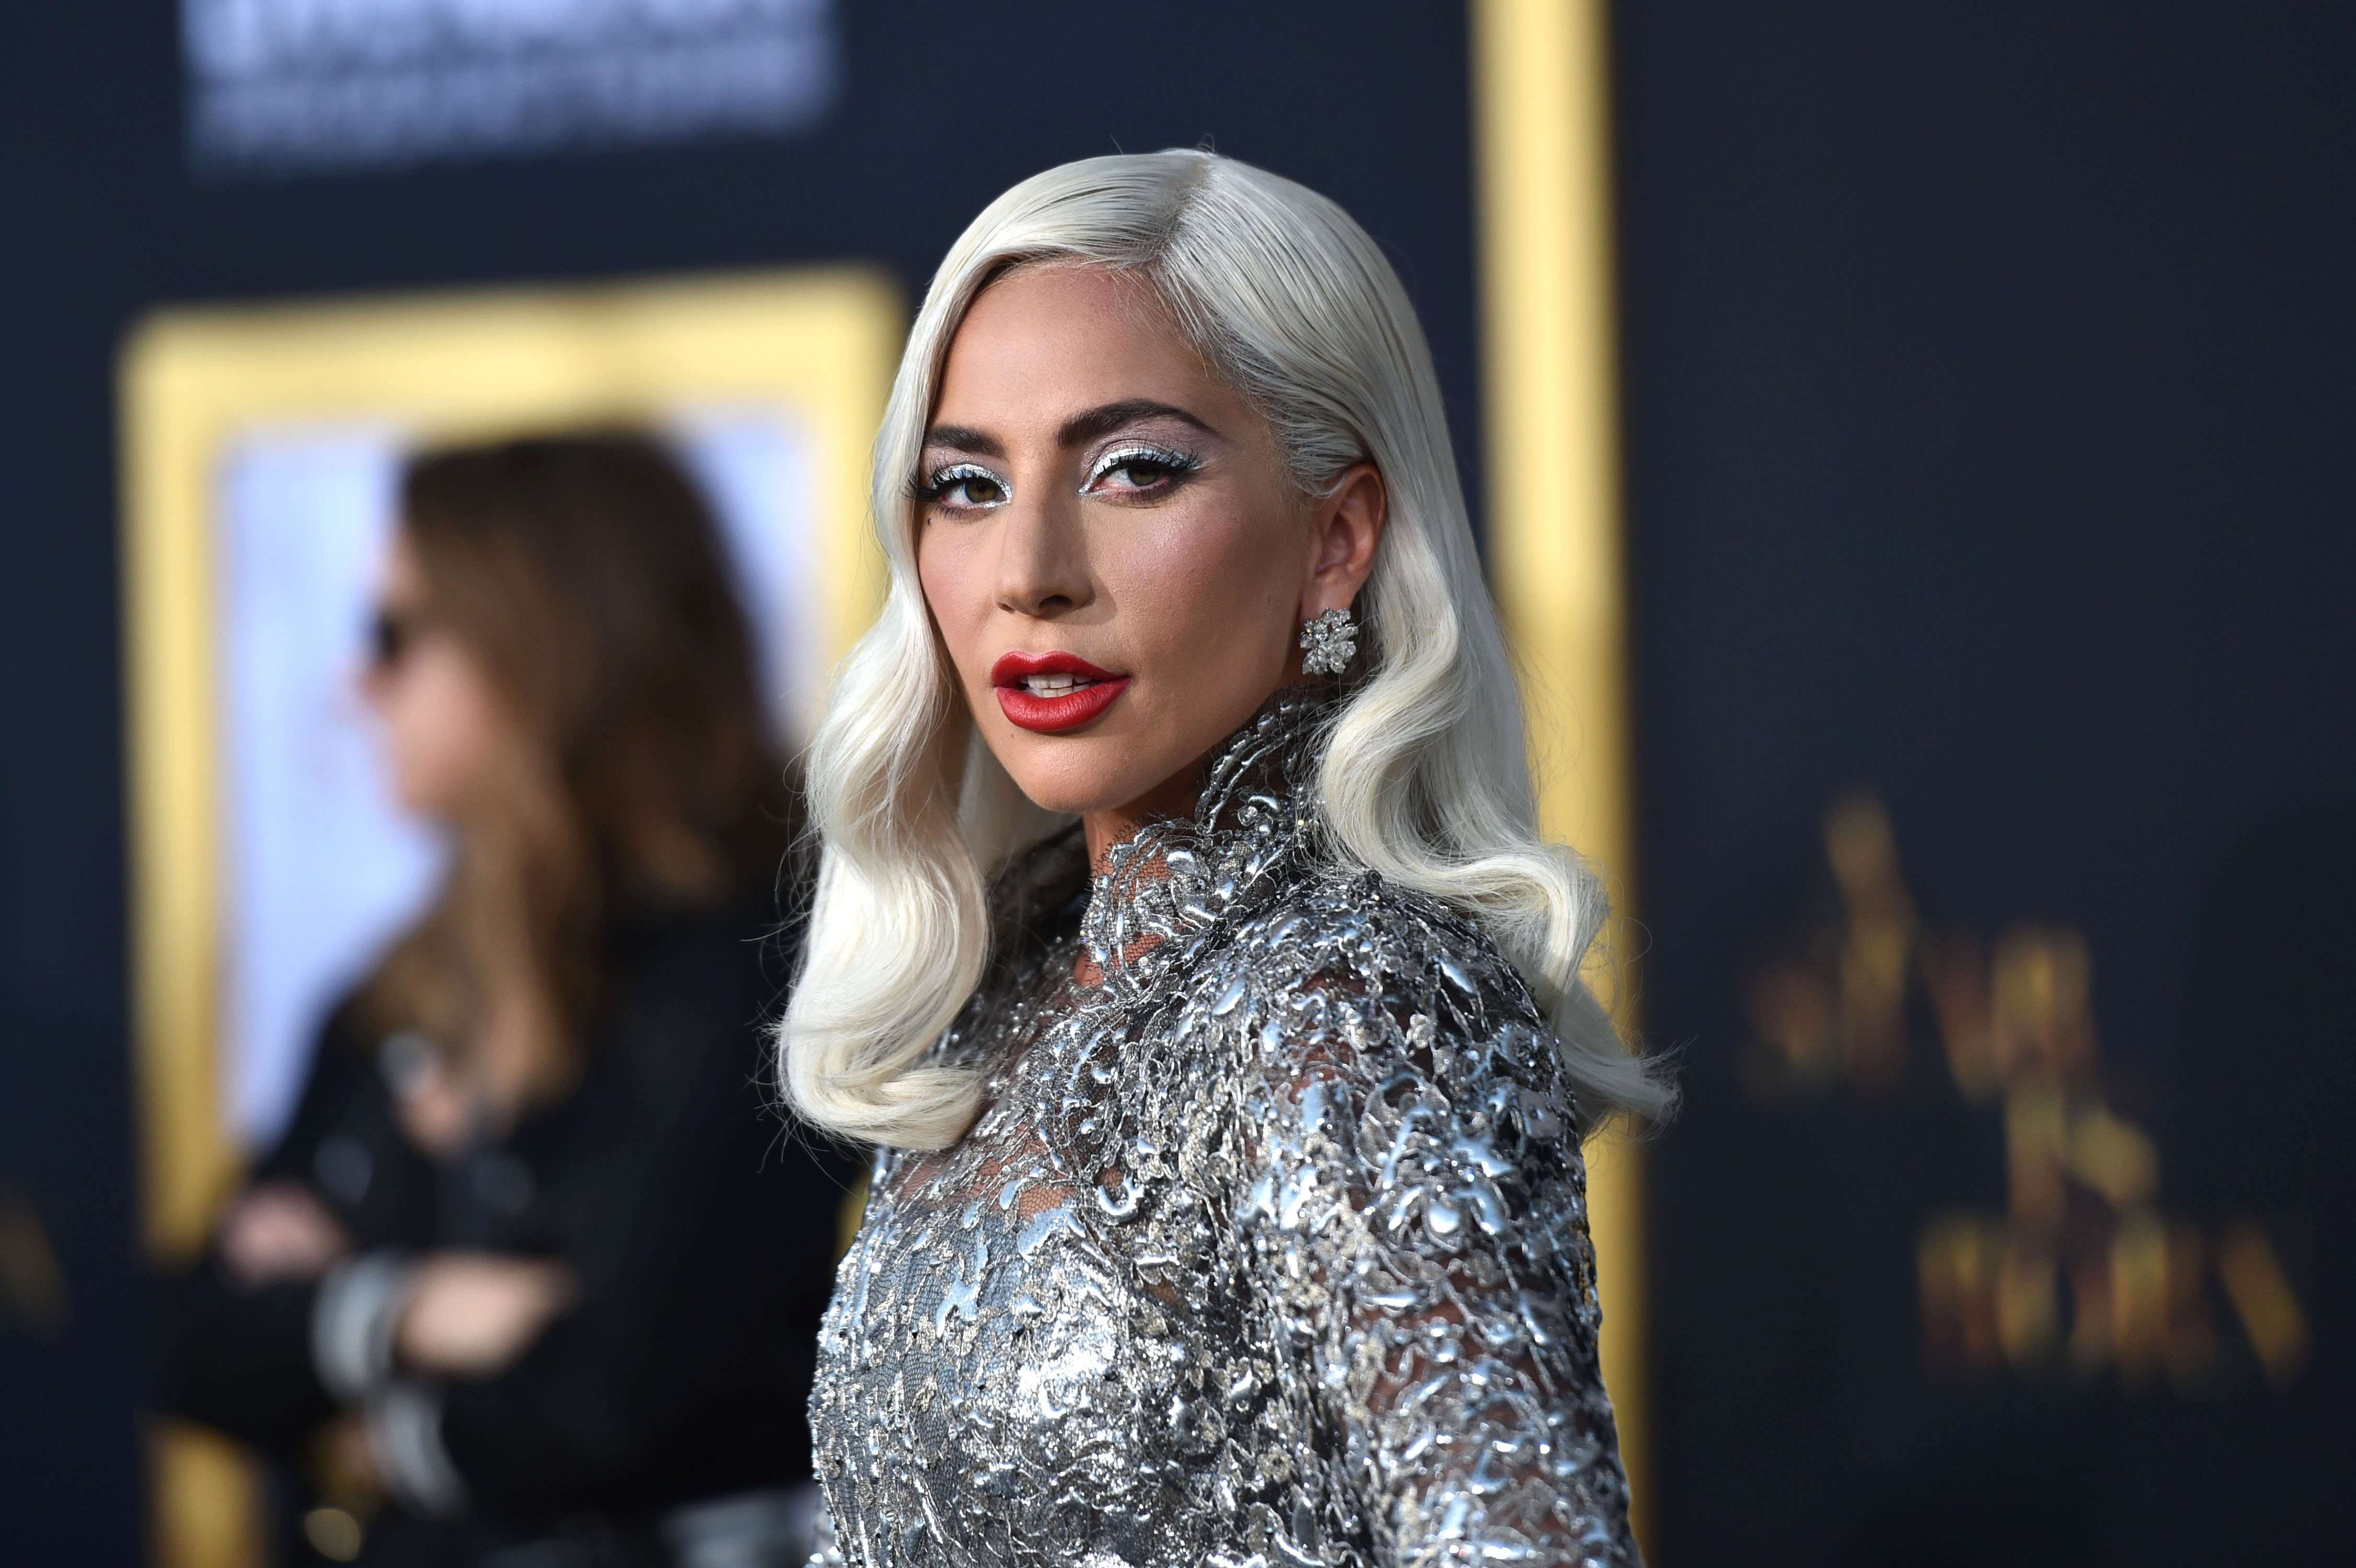 Lady Gaga at the premiere of 'A Star Is Born' in 2018